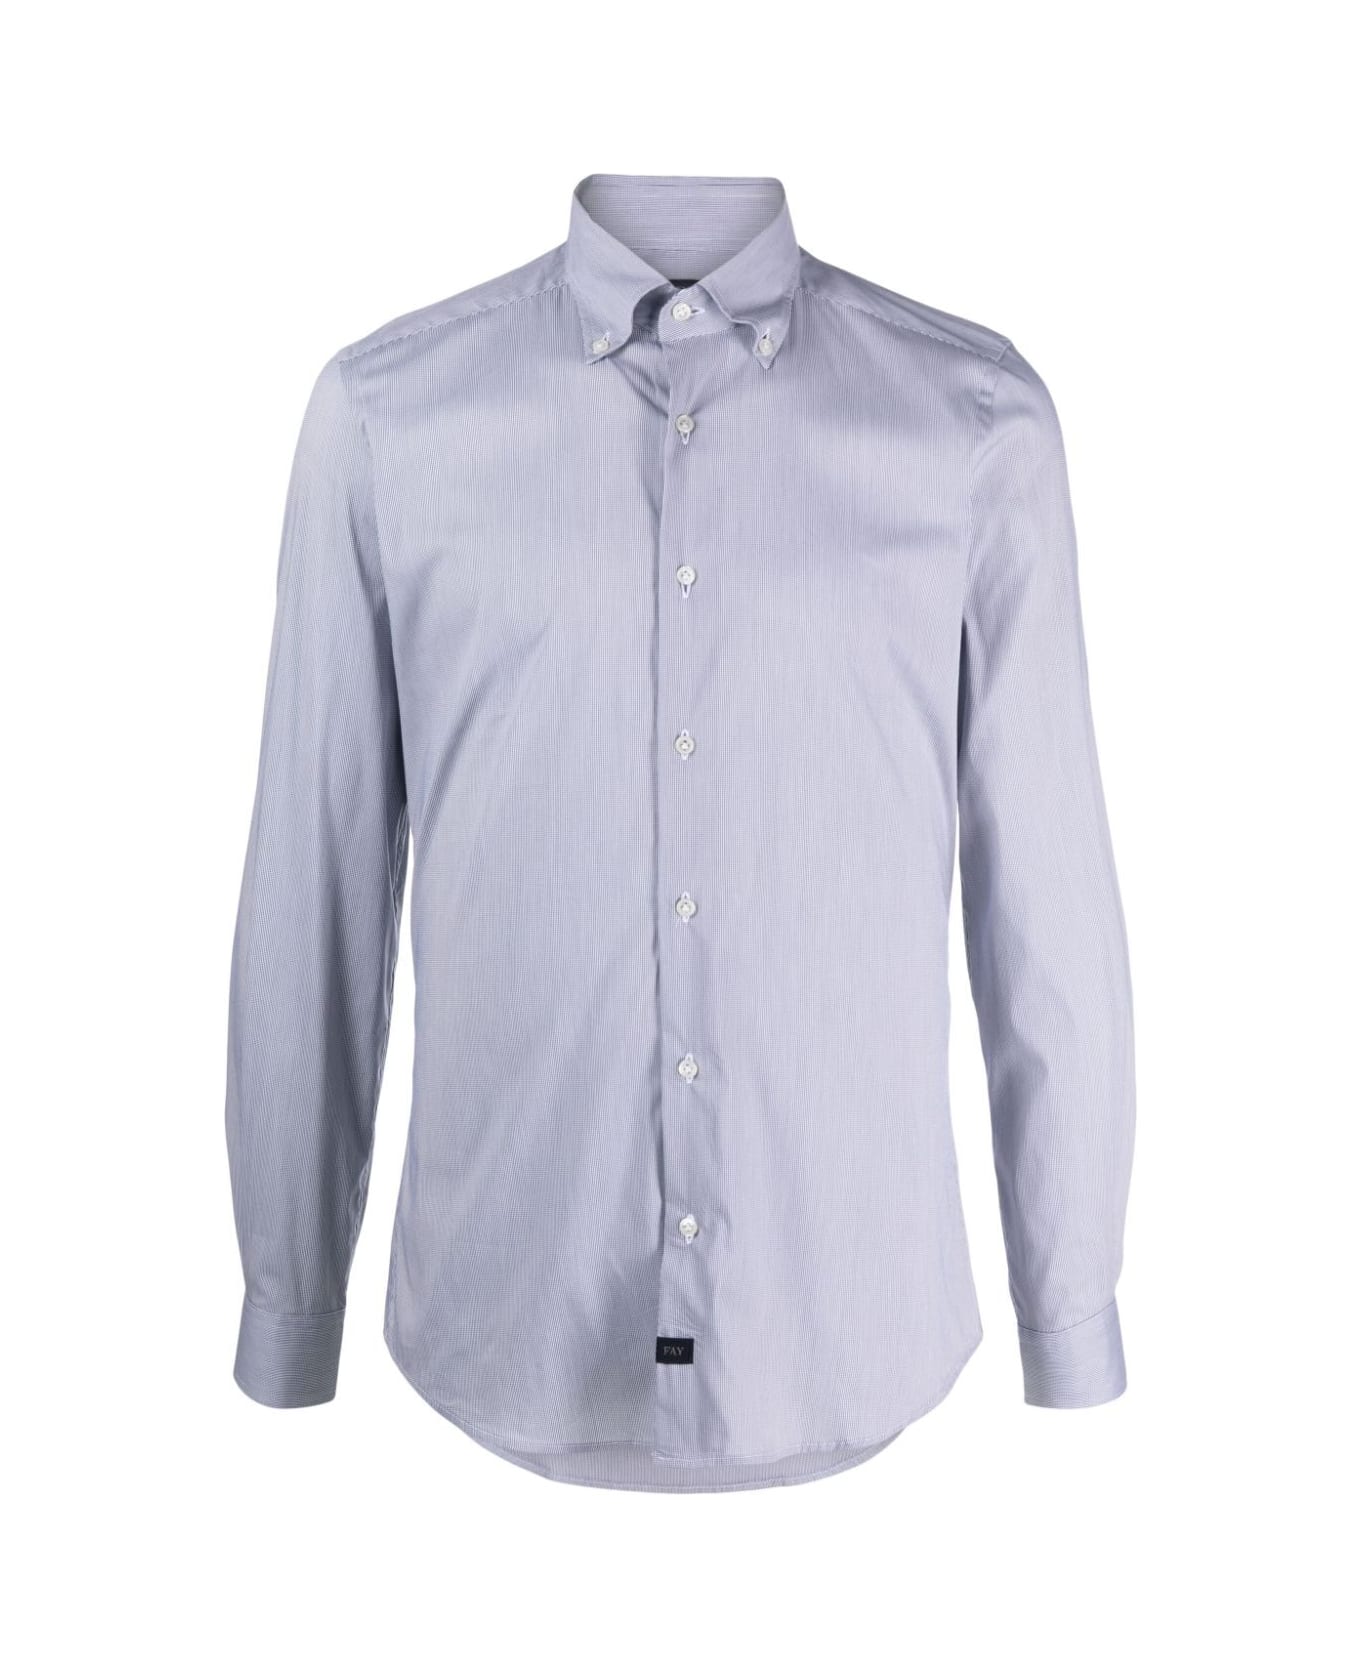 Fay New Button Down Stretch Popeline Microchecked Shirt - White